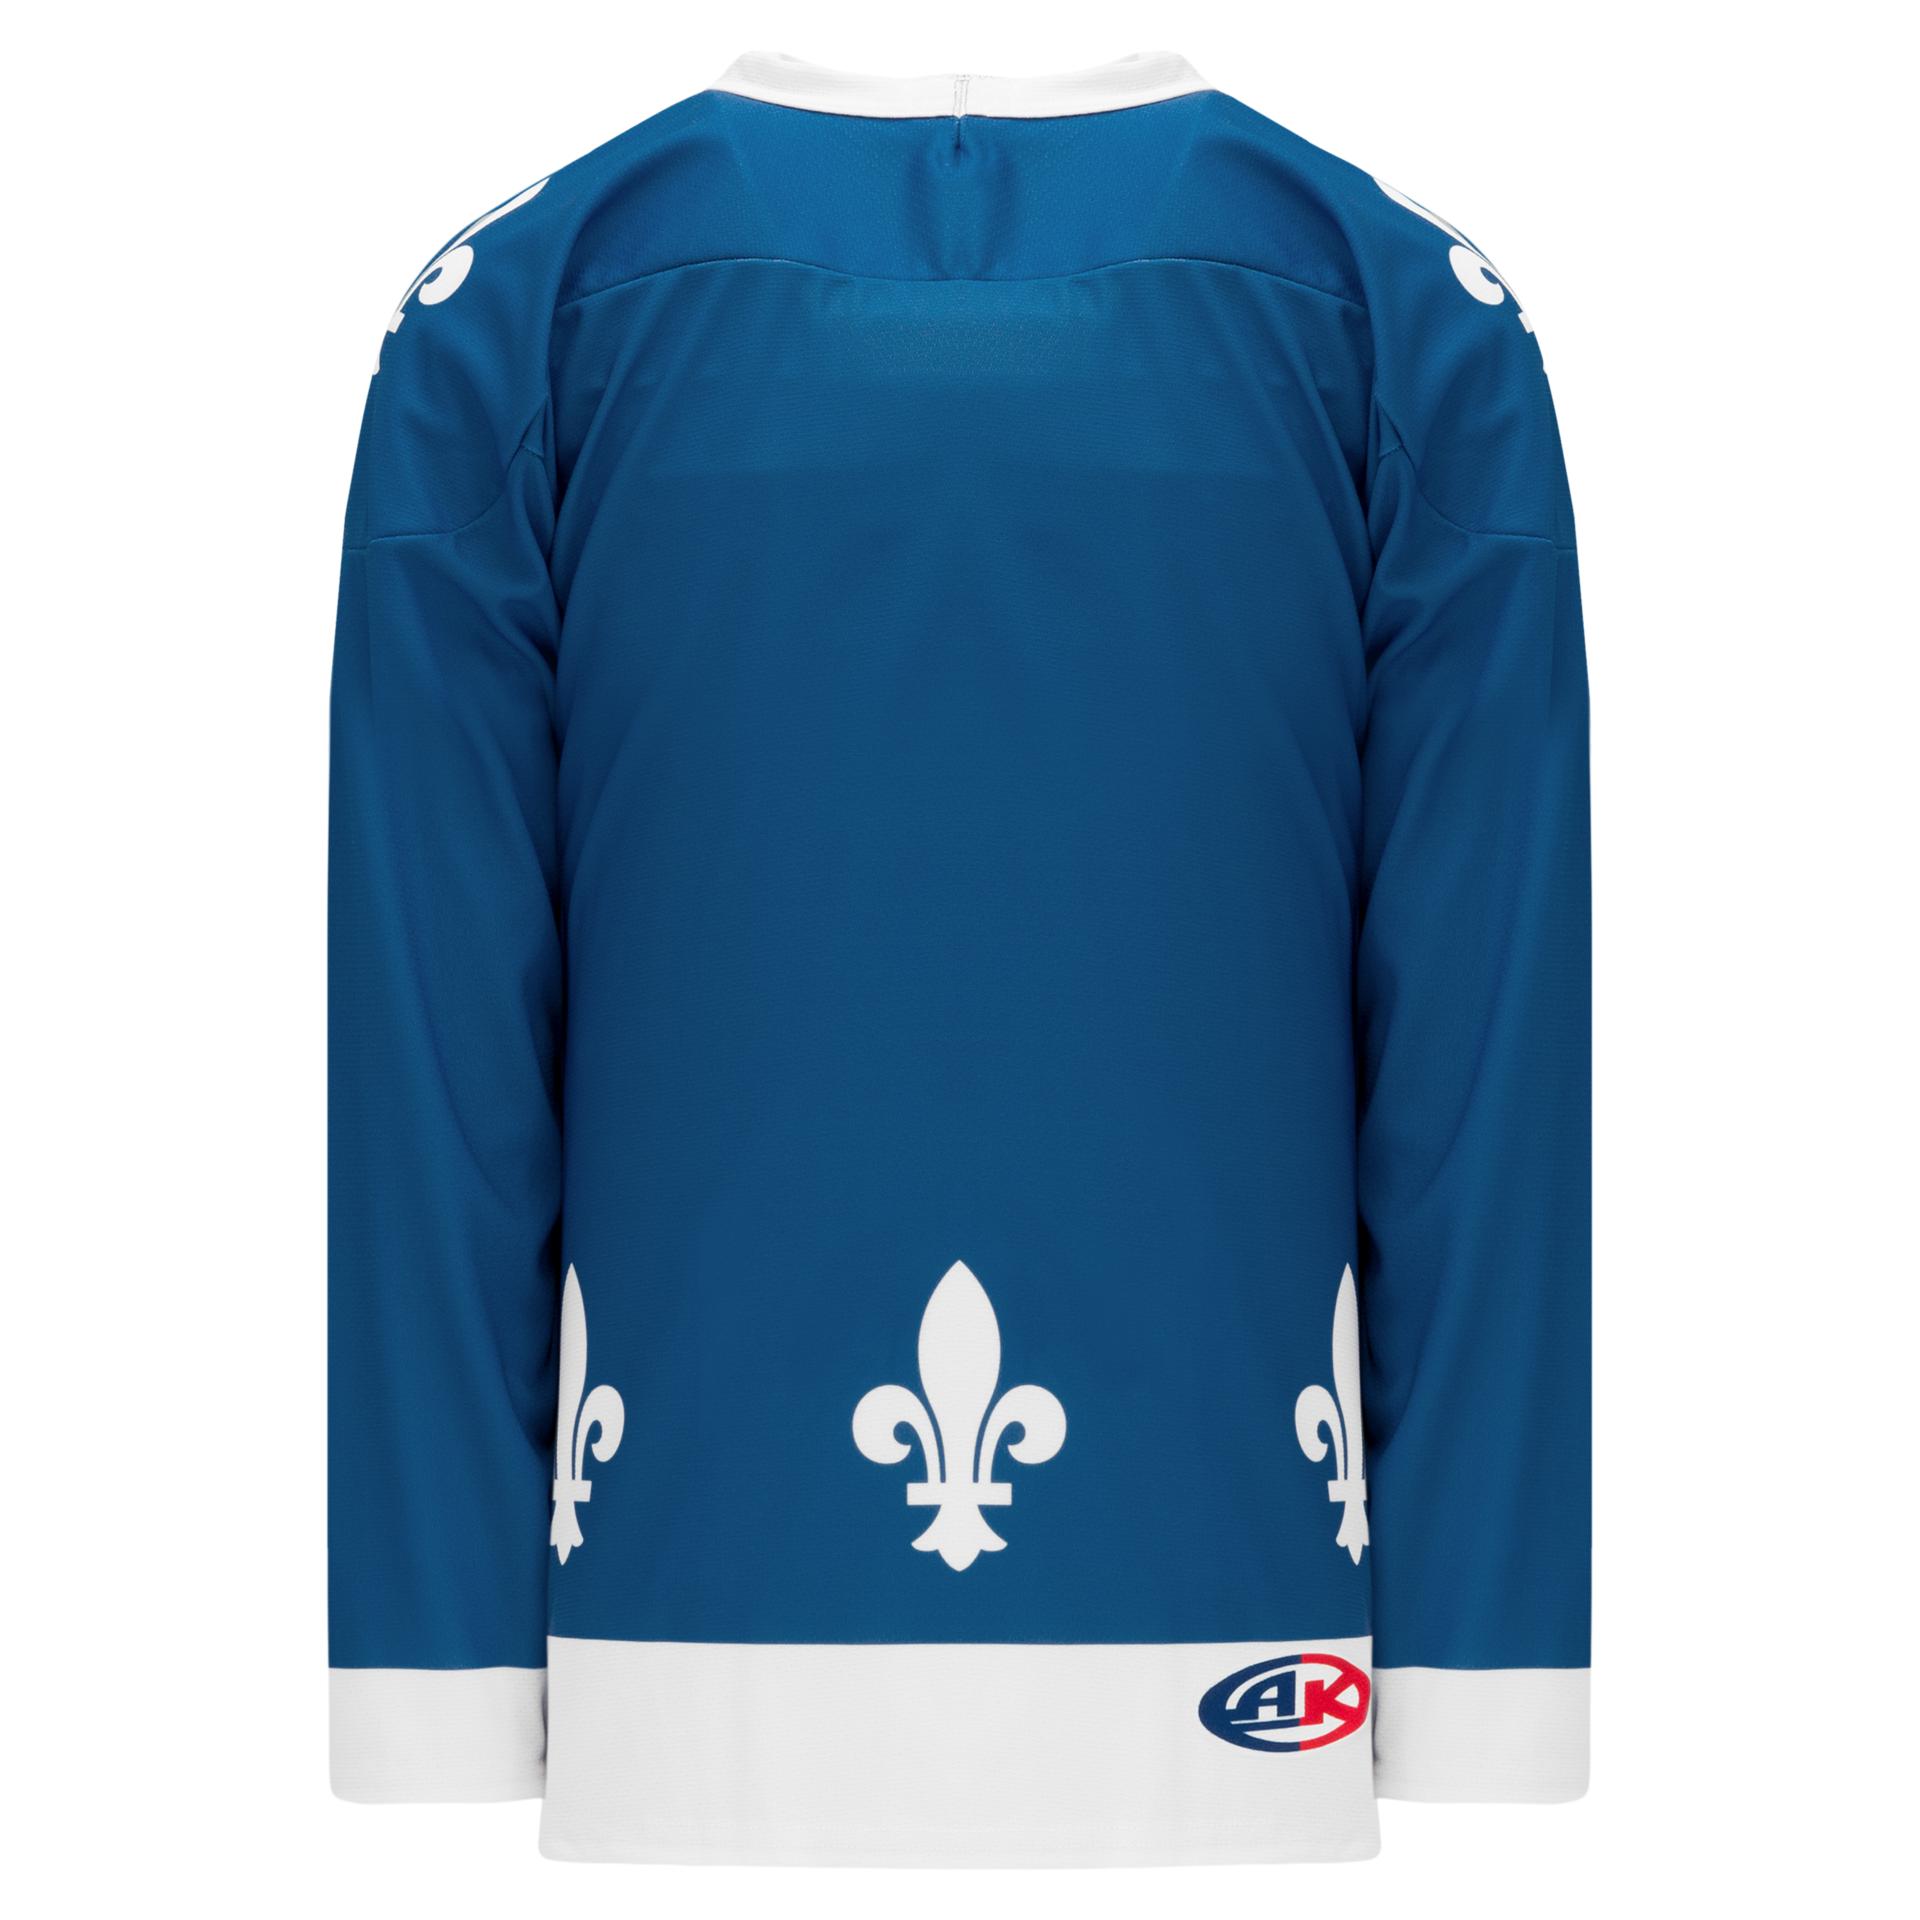 nordiques hockey jersey